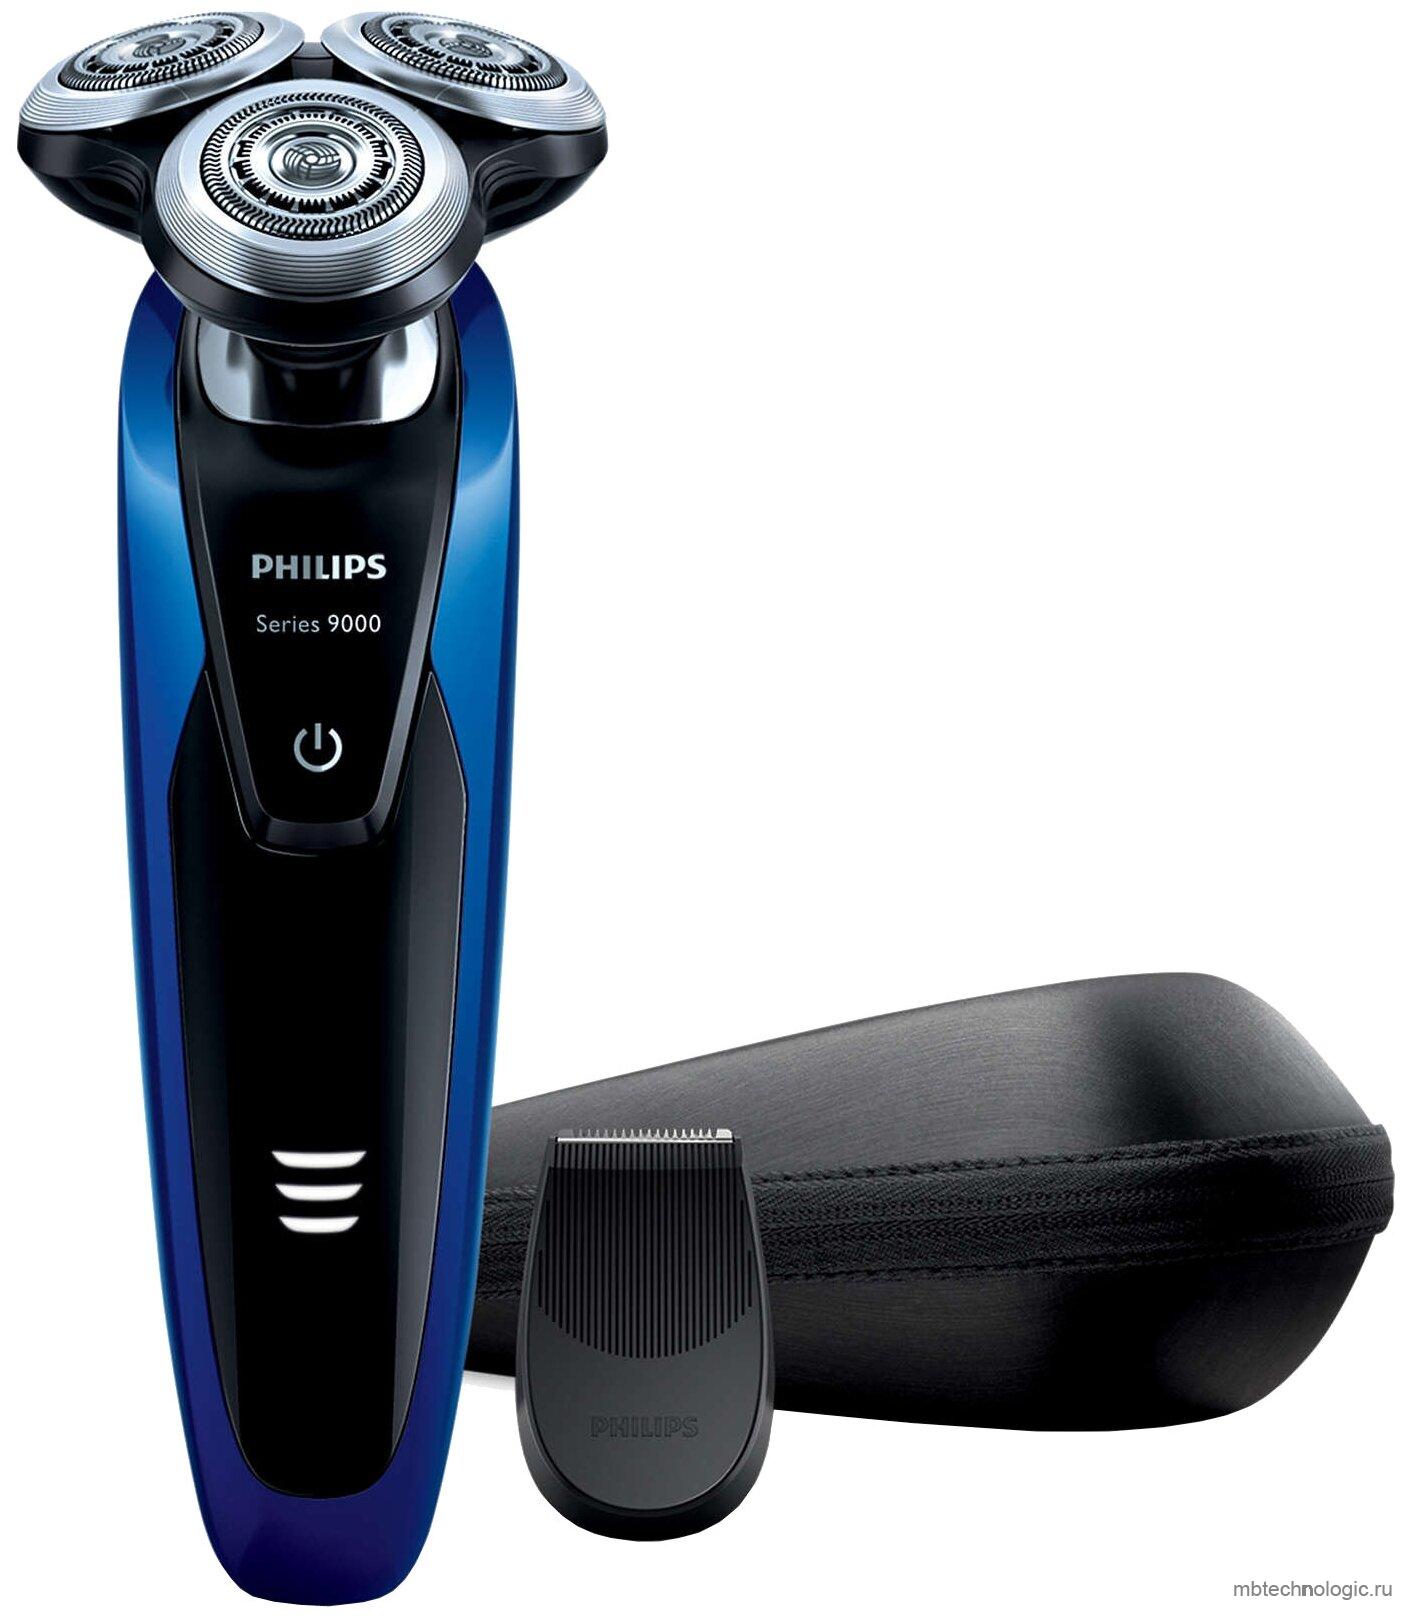 Philips S9181 Series 9000 Wet and dry